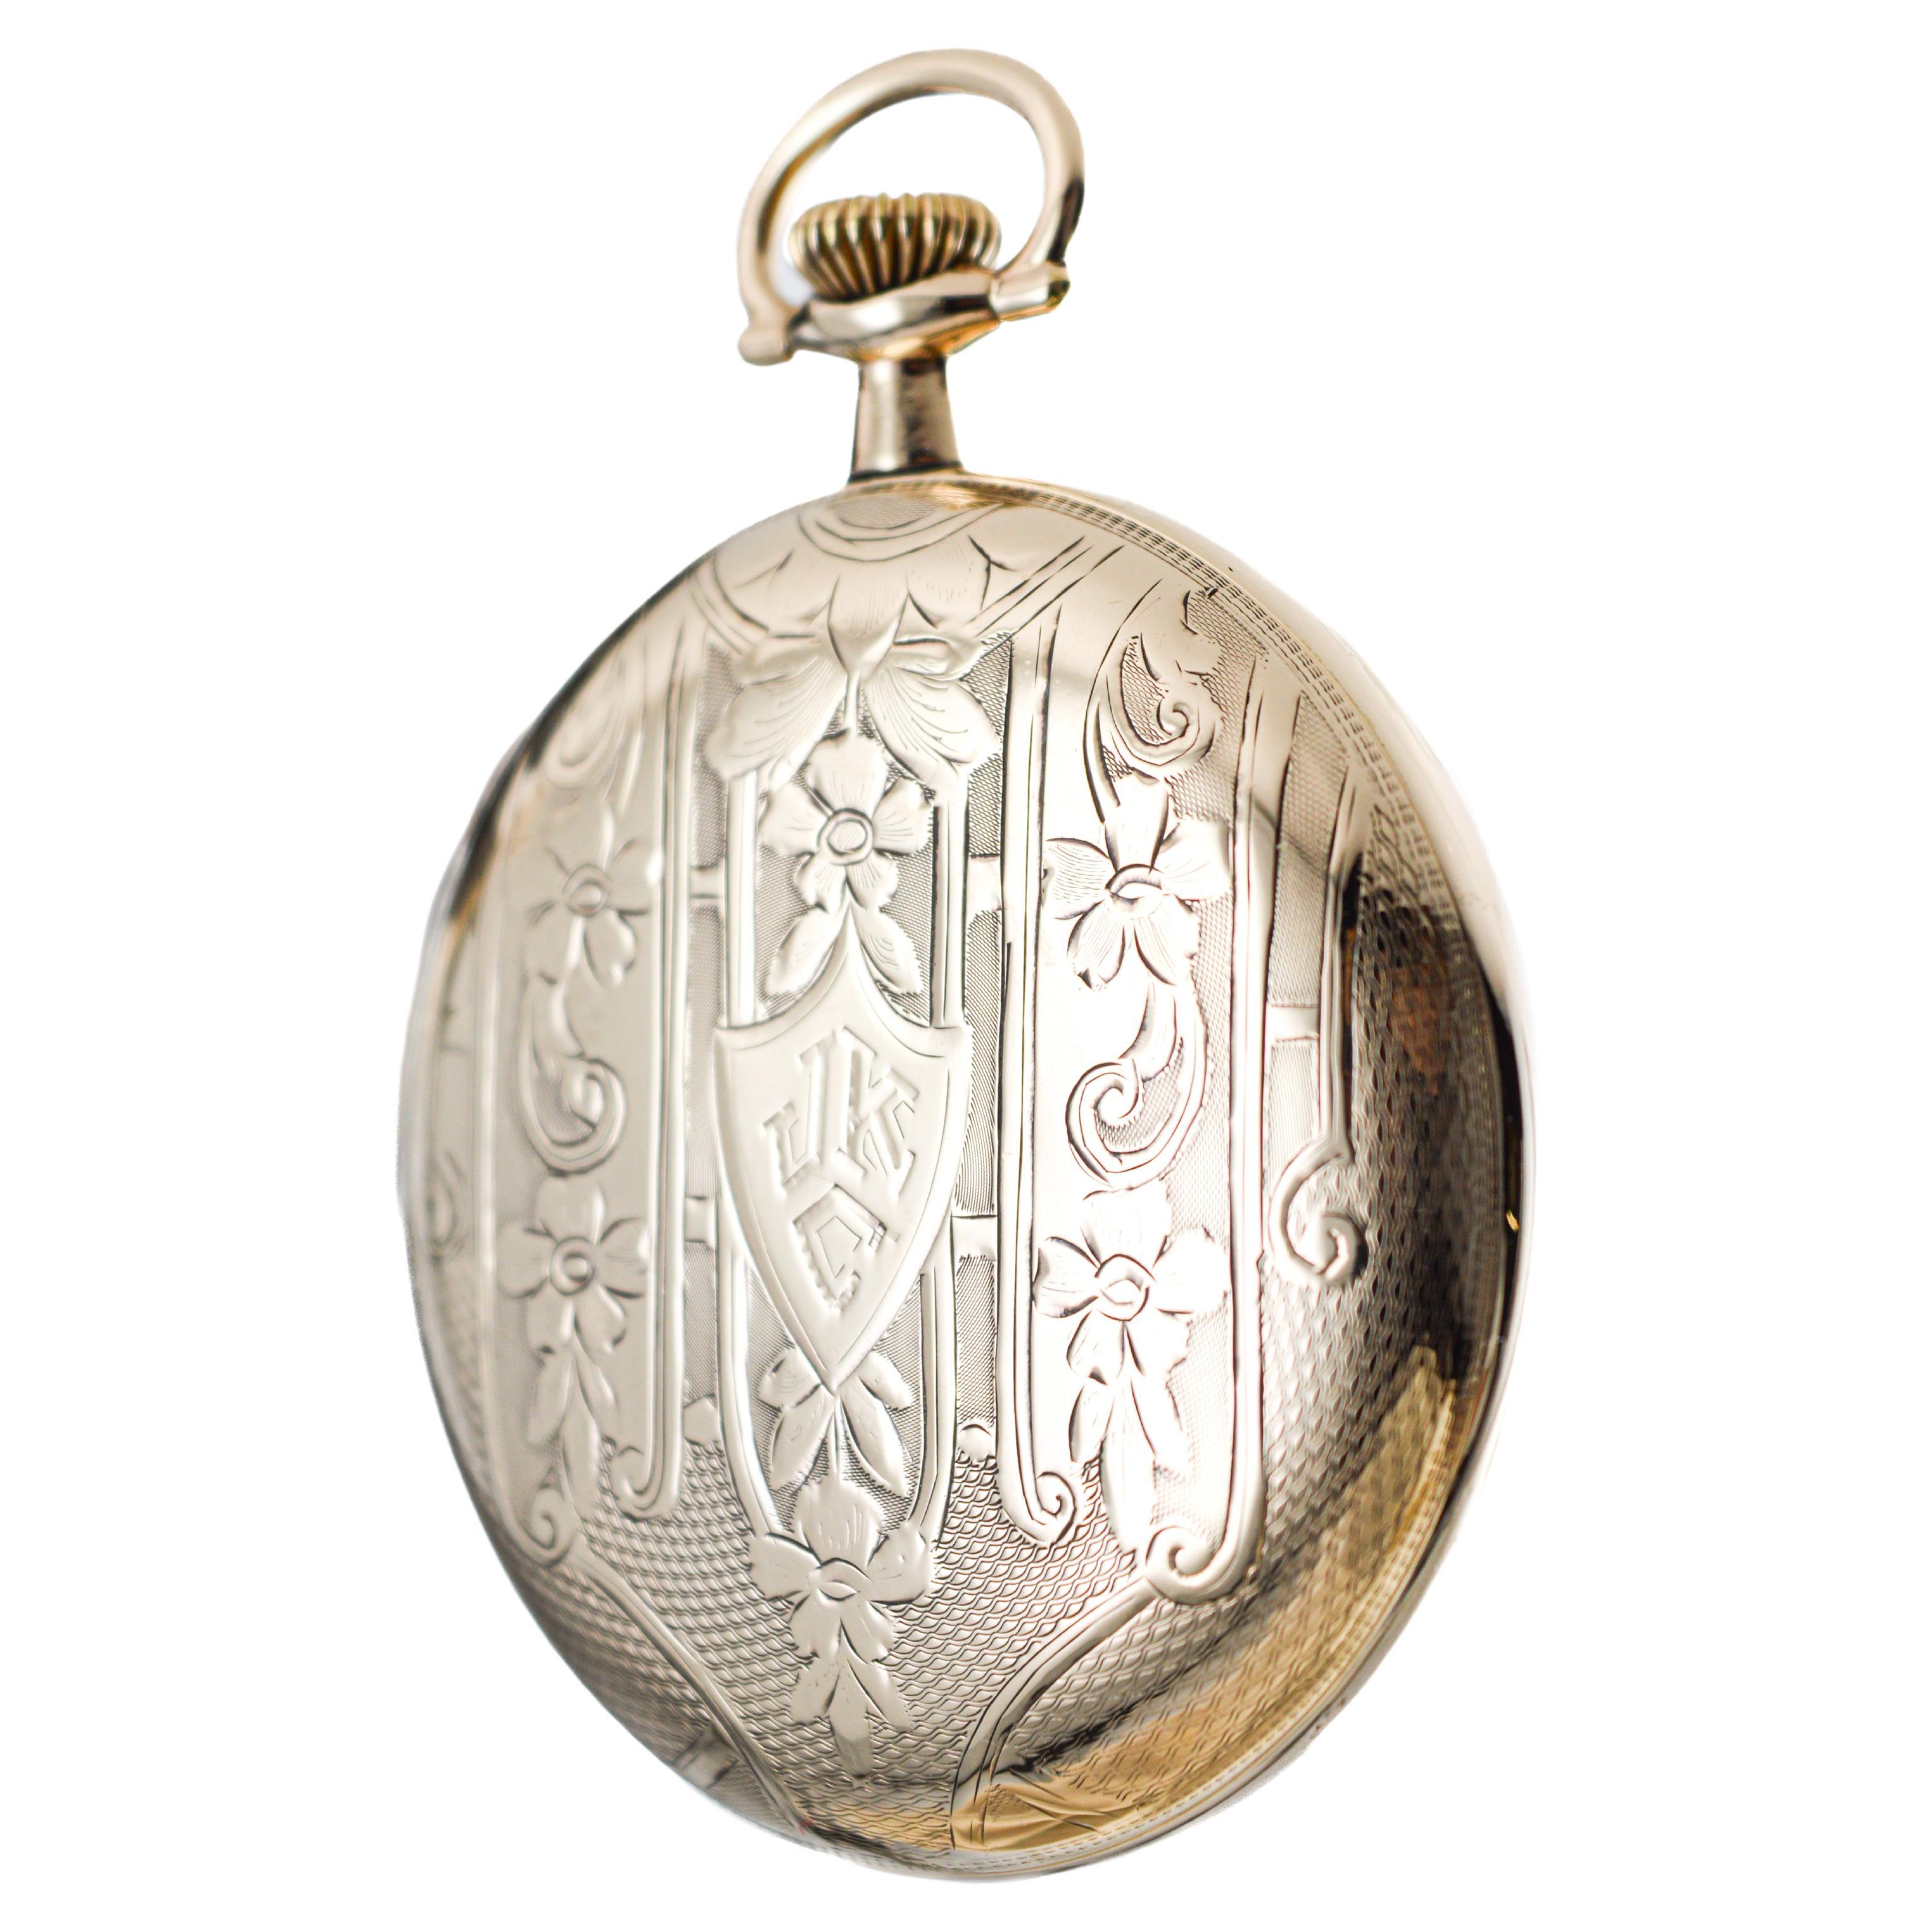 Elgin Gold Filled Art Deco Pocket Watch with Original Aged Crystal From 1916 1